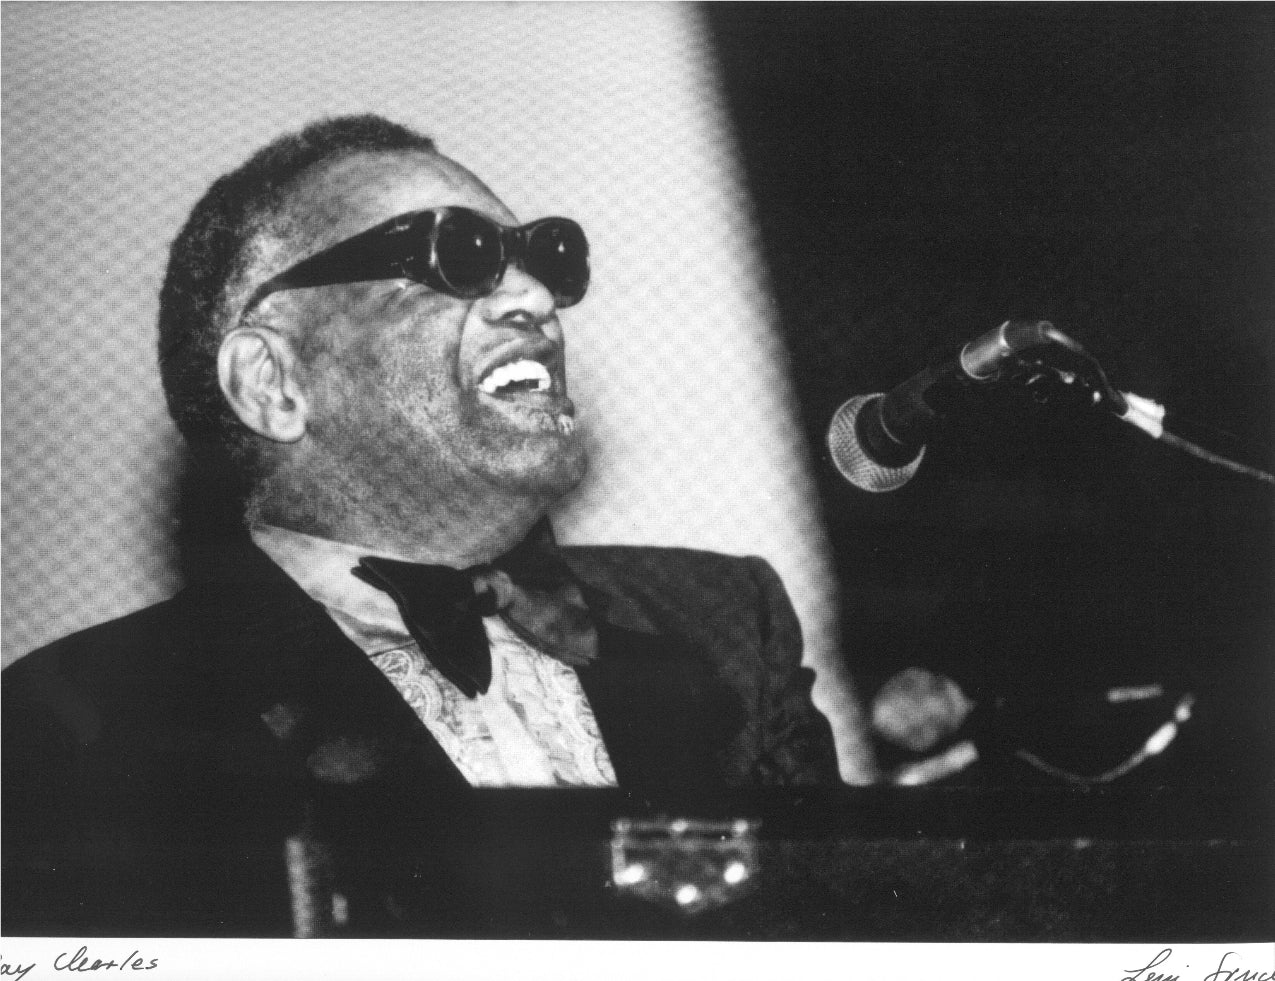 Ray Charles Leni Sinclair photo   wwww.lostinsounddetroit.com